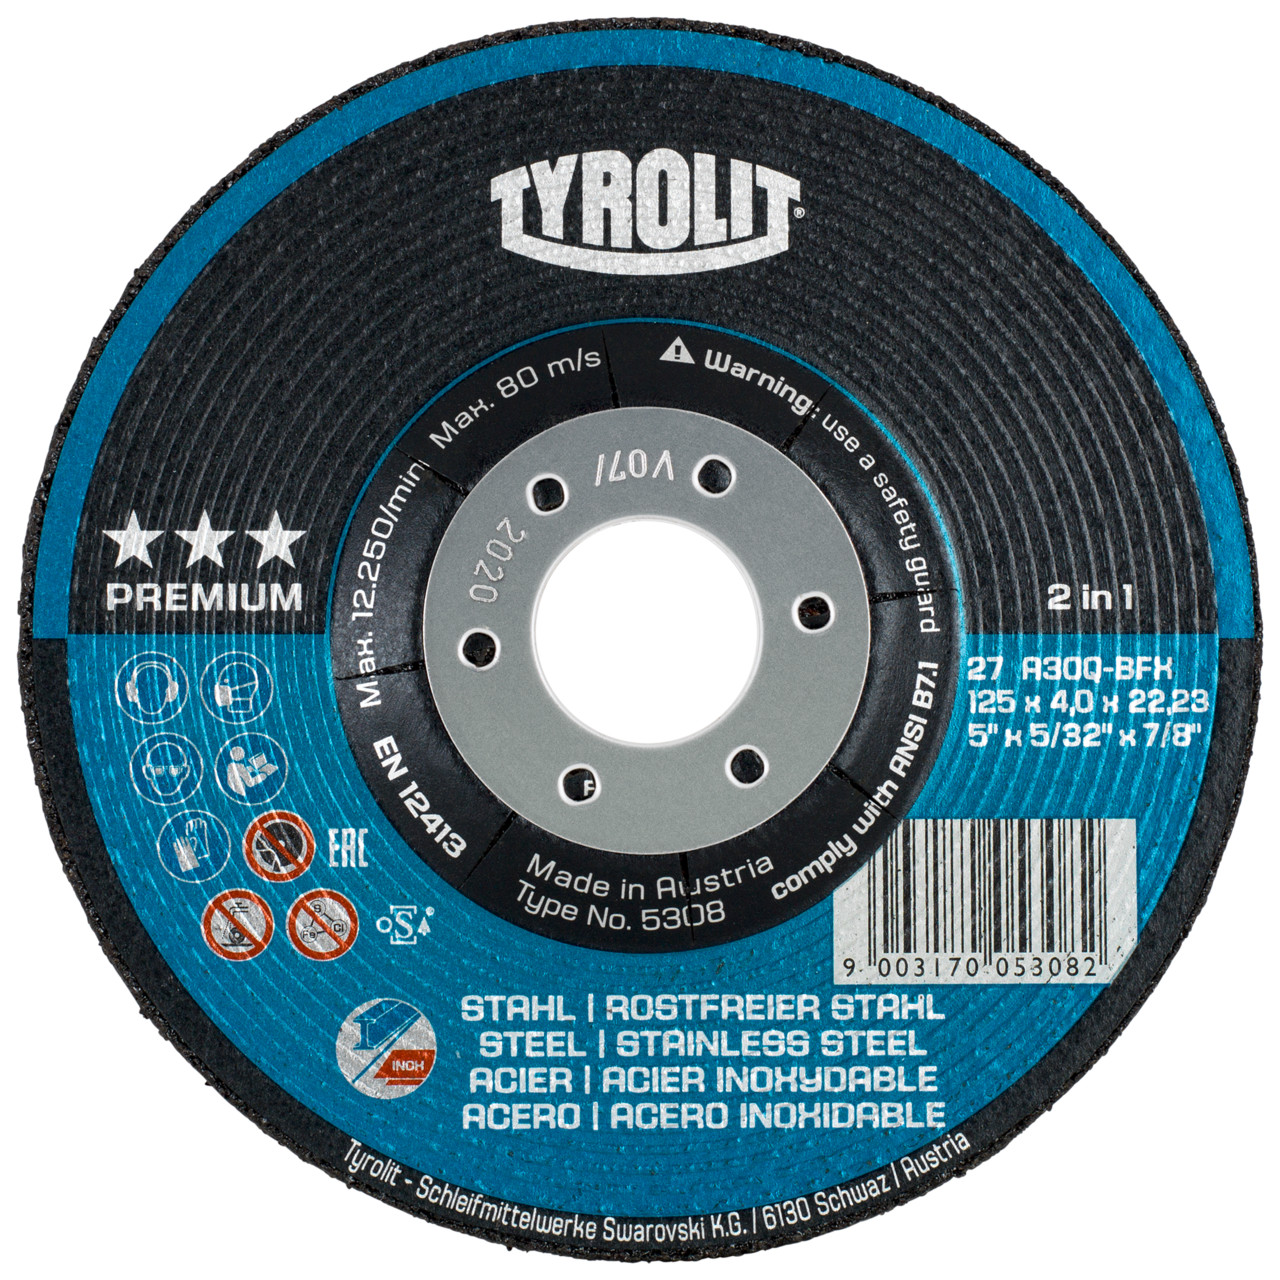 TYROLIT grinding wheel DxUxH 230x7x22.23 2in1 for steel and stainless steel, shape: 27 - offset version, Art. 34046134